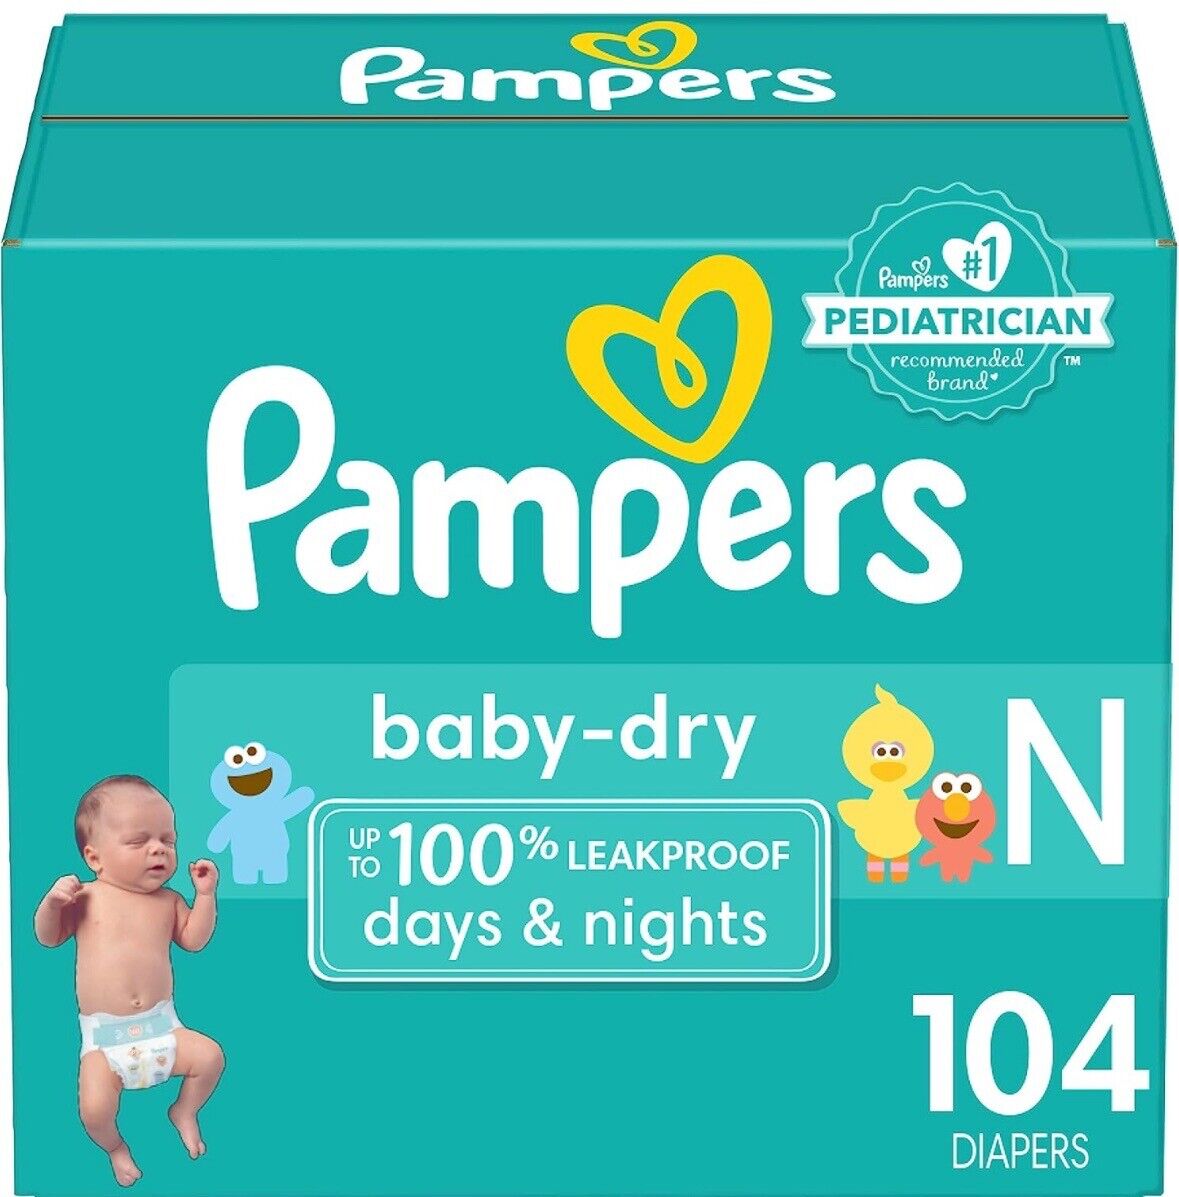 sellin pampers